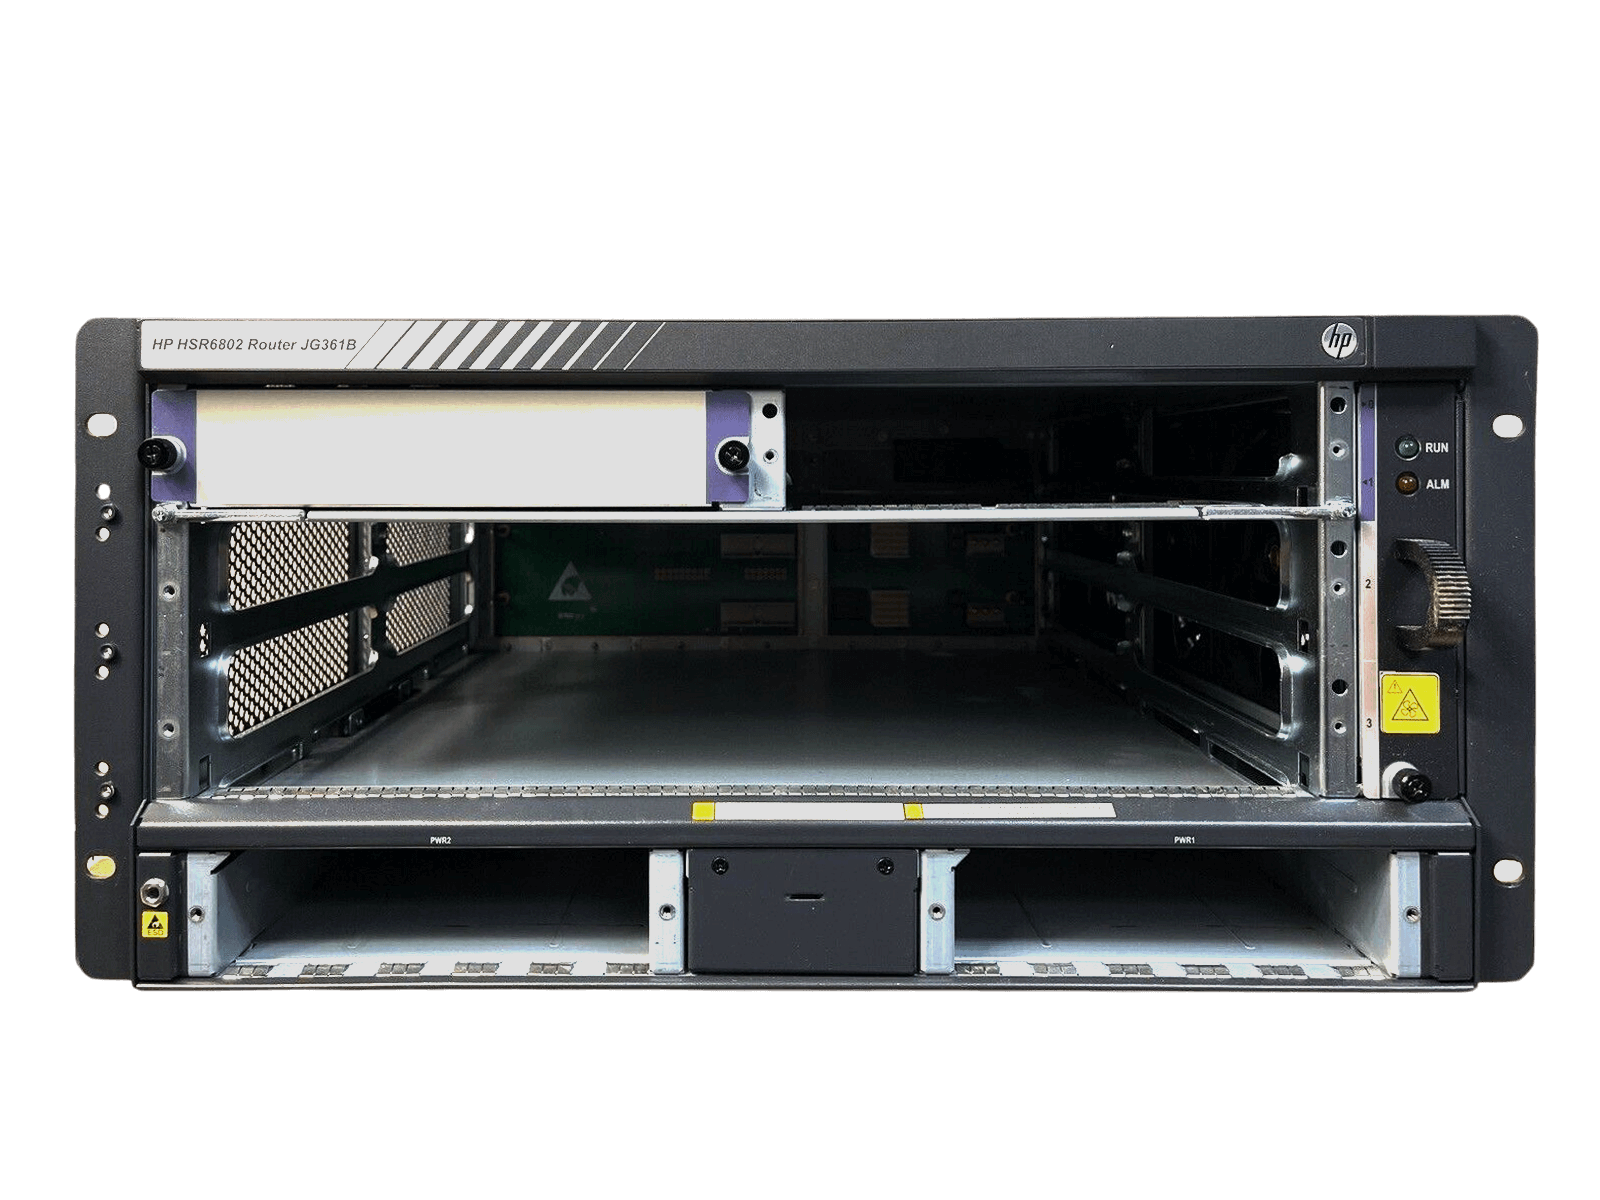 HPE JG361B FlexNetwork HSR6802 Router Chassis with Fan Module.